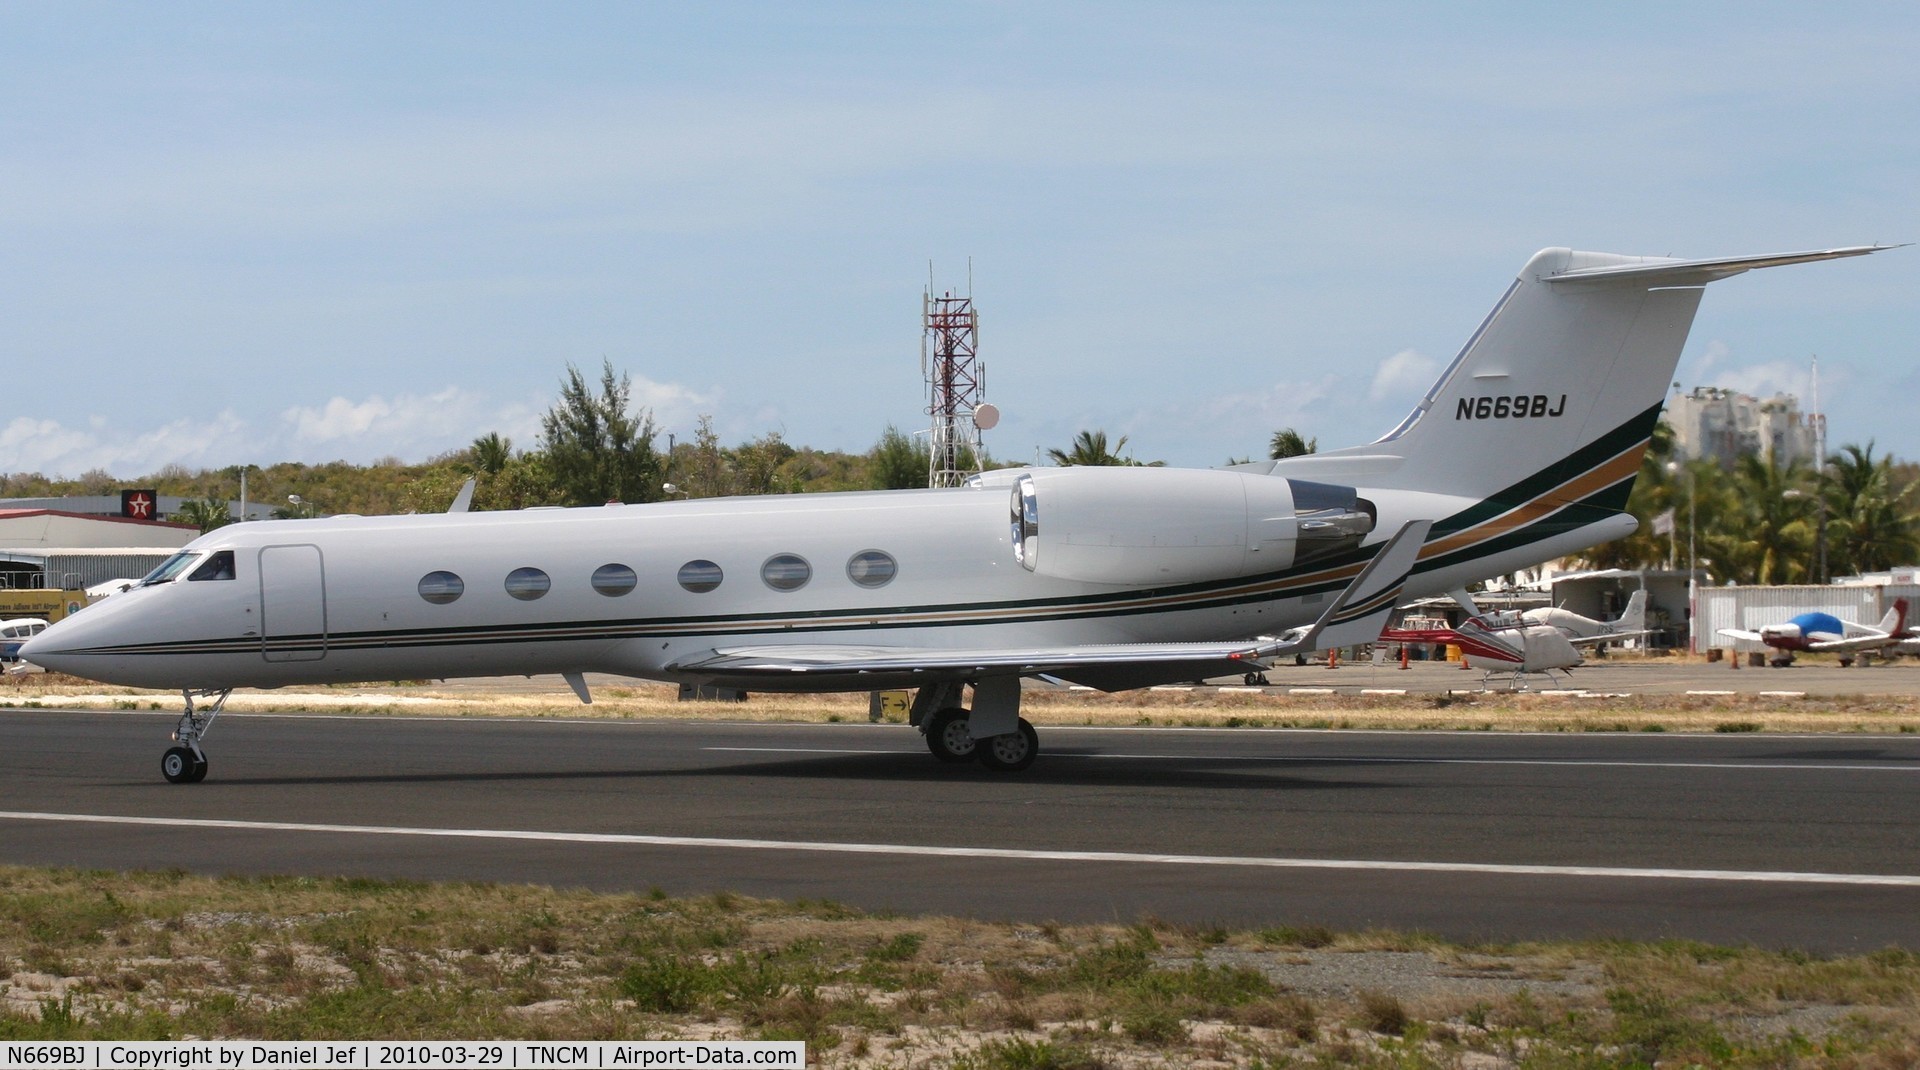 N669BJ, 2000 Gulfstream Aerospace G-IV C/N 1397, N669BJ back tracking the active runway for parking at TNCM